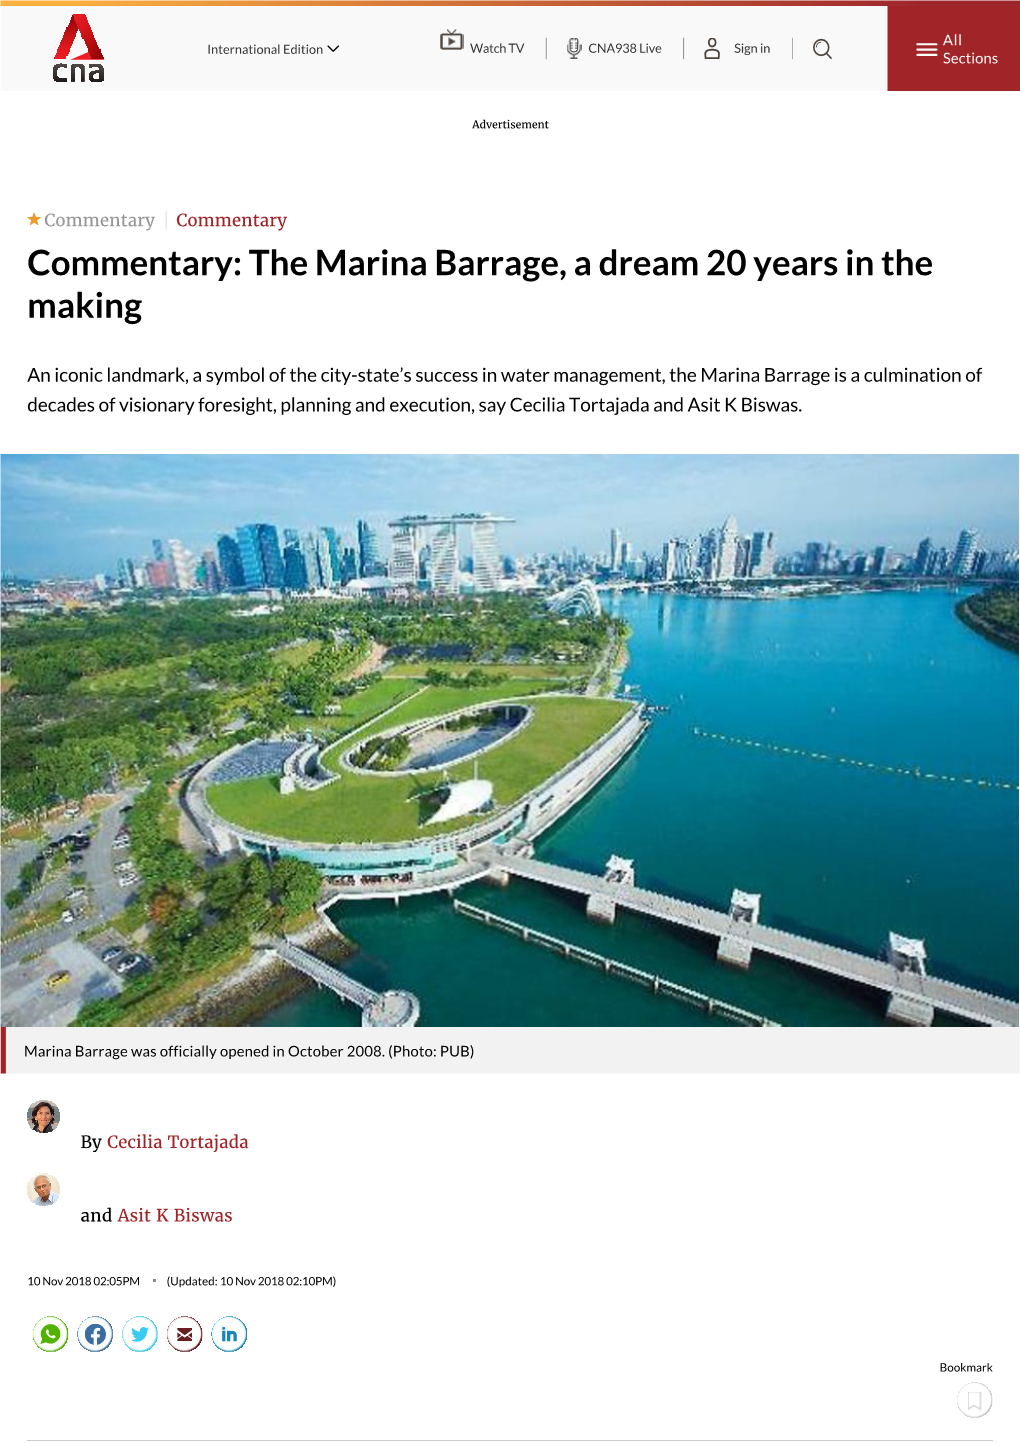 The Marina Barrage, a Dream 20 Years in the Making